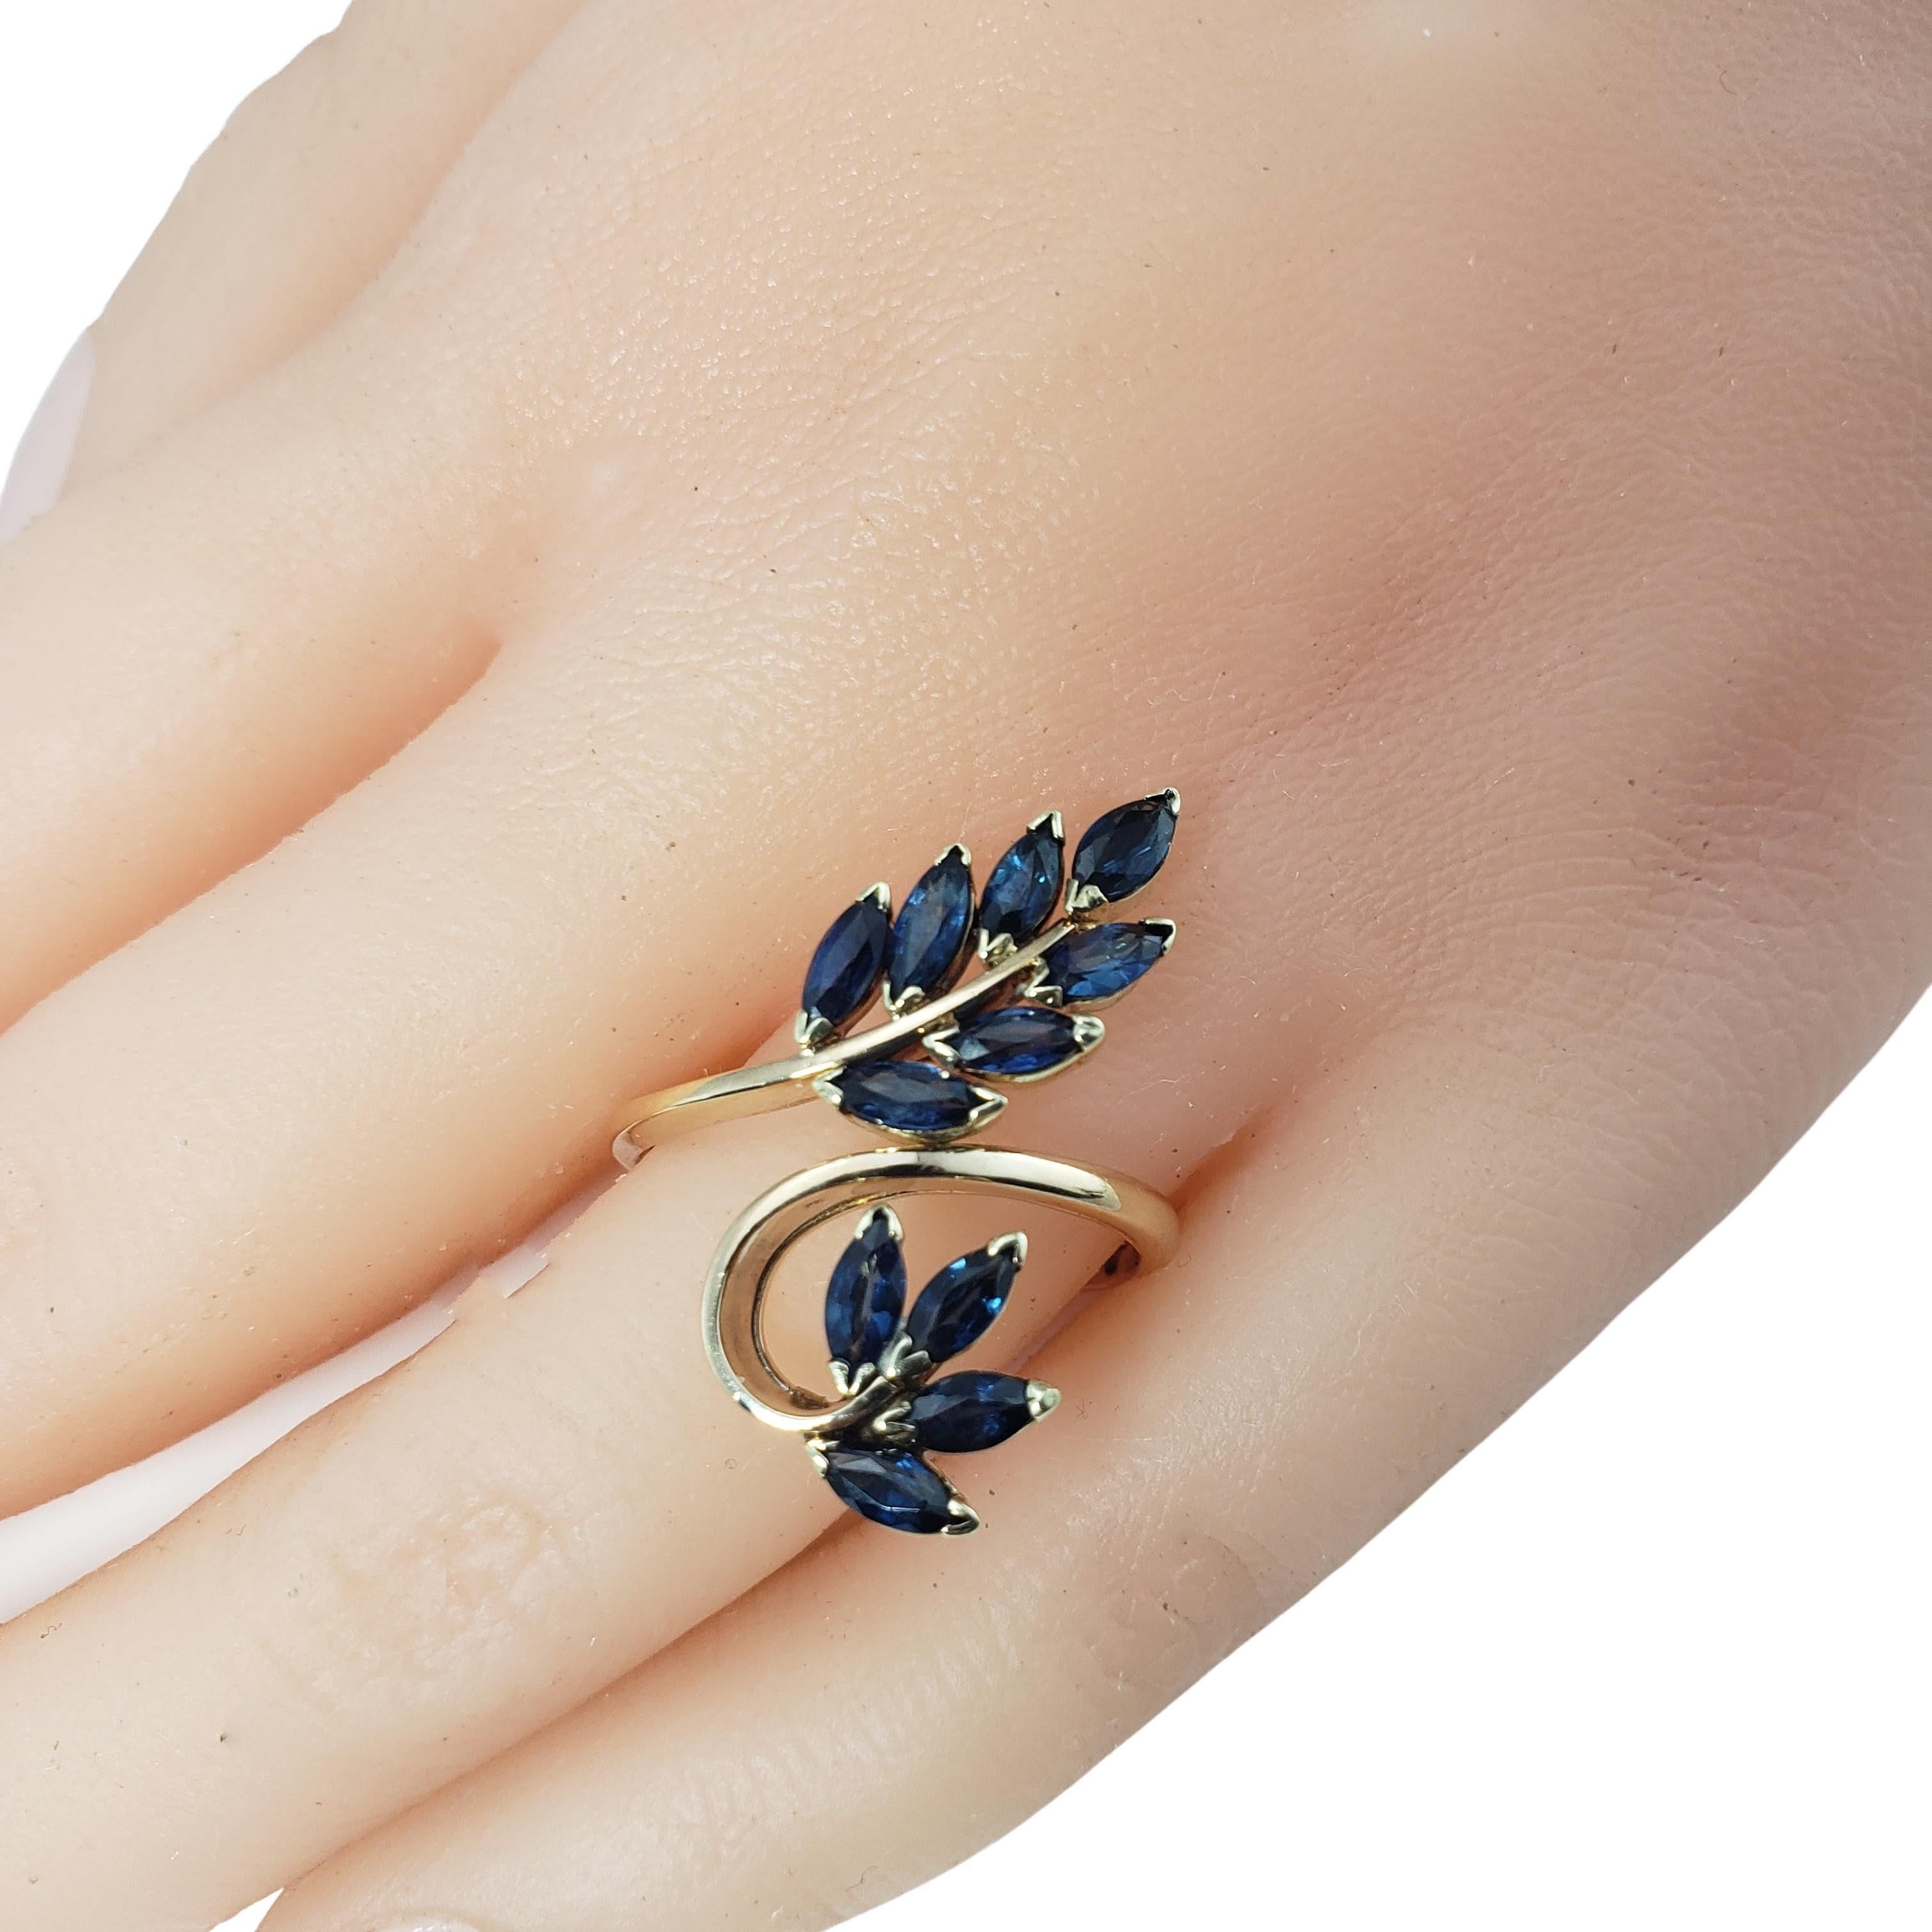 Vintage 14 Karat Yellow Gold and Sapphire Ring Size 9 -

This stunning 14K yellow gold ring features 11 marquis sapphires (5 mm x 3 mm each) set in a lovely leaf design. Width: 25 mm.
Shank: 2 mm.

Ring Size: 9

Weight: 2.7 dwt. / 4.2 gr.

Stamped: